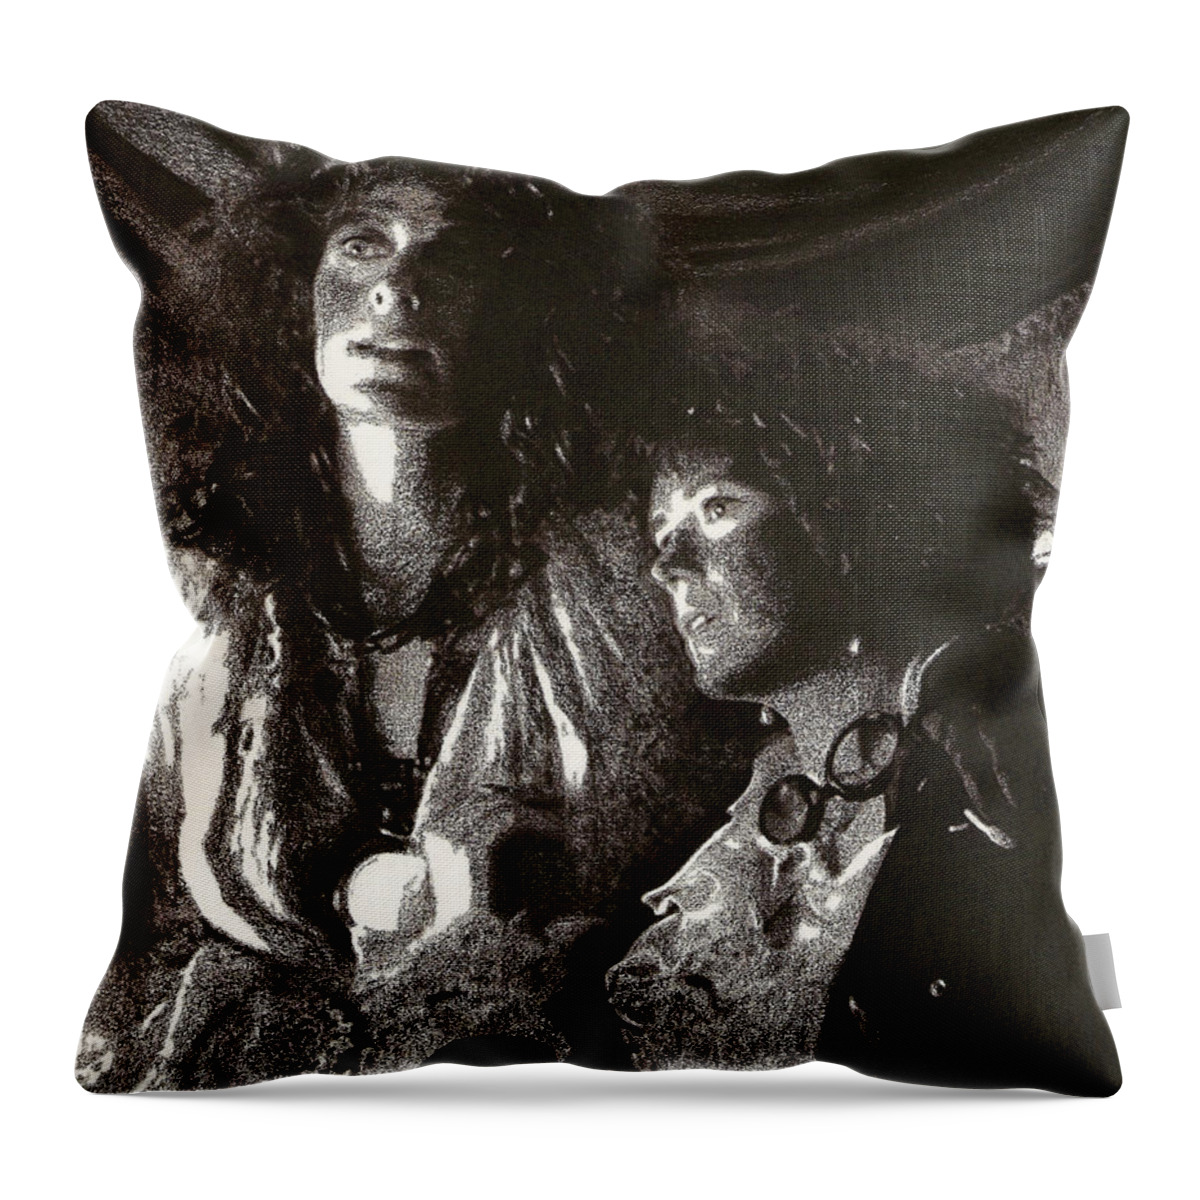 Female Throw Pillow featuring the drawing Mother and Daughter by Mark Baranowski